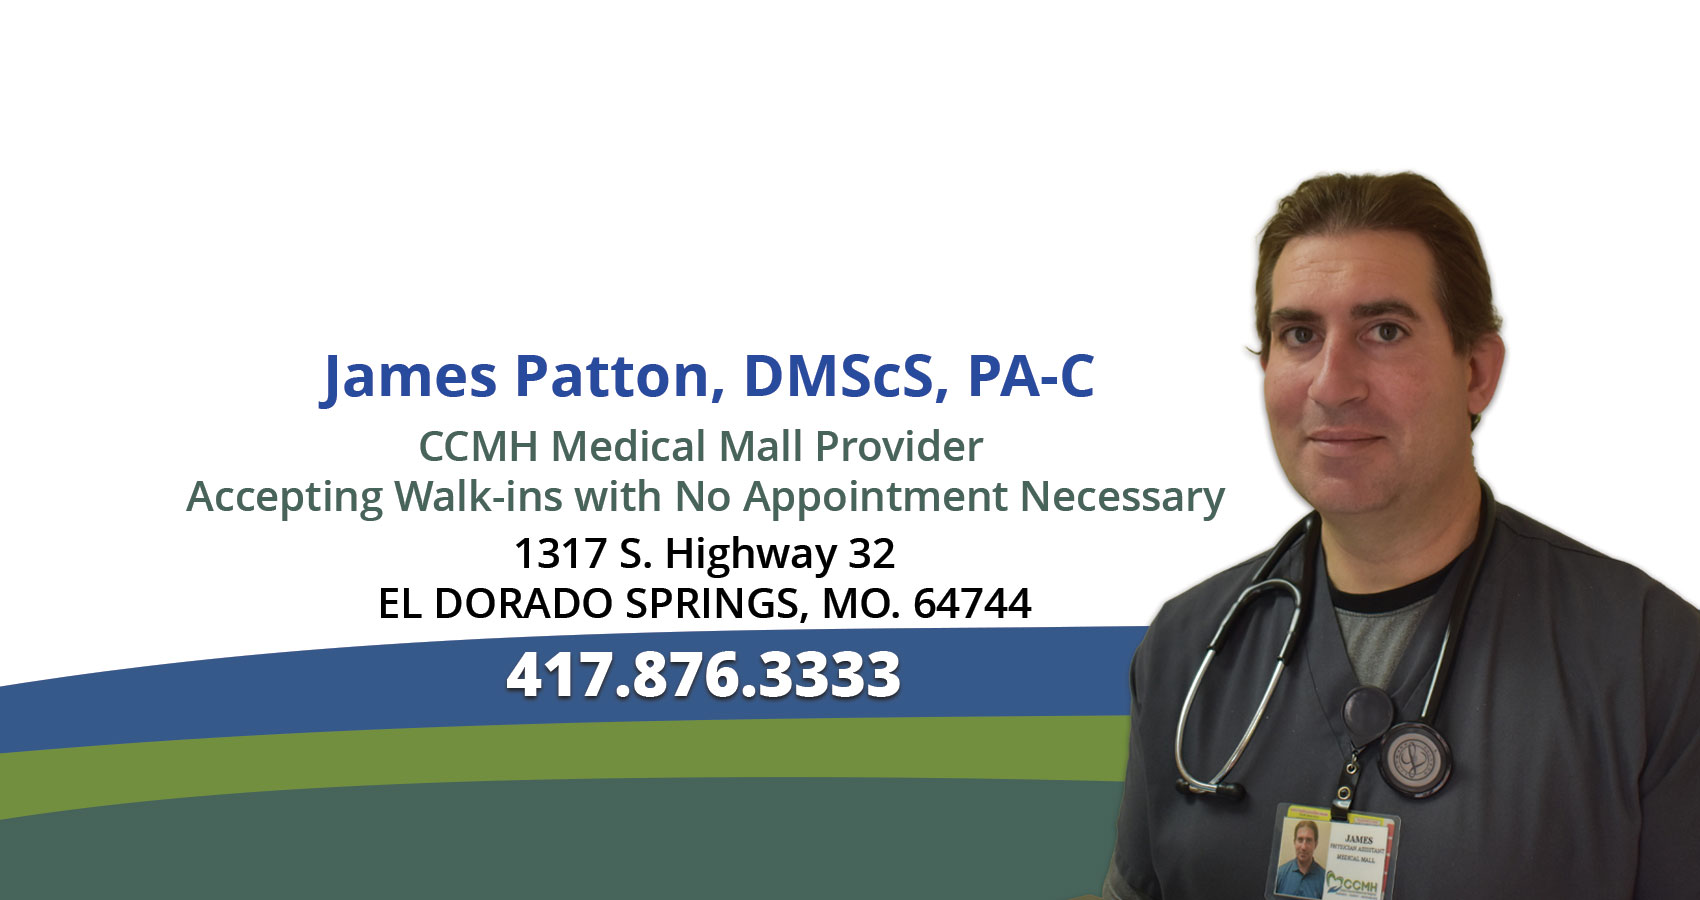 James Patton, DMScS, PA-C
CCMH Medical Mall Provider
Accepting Walk-ins with No Appointment Necessary
1317 S. Highway 32
EL DORADO SPRINGS, MO. 64744
417.876.3333